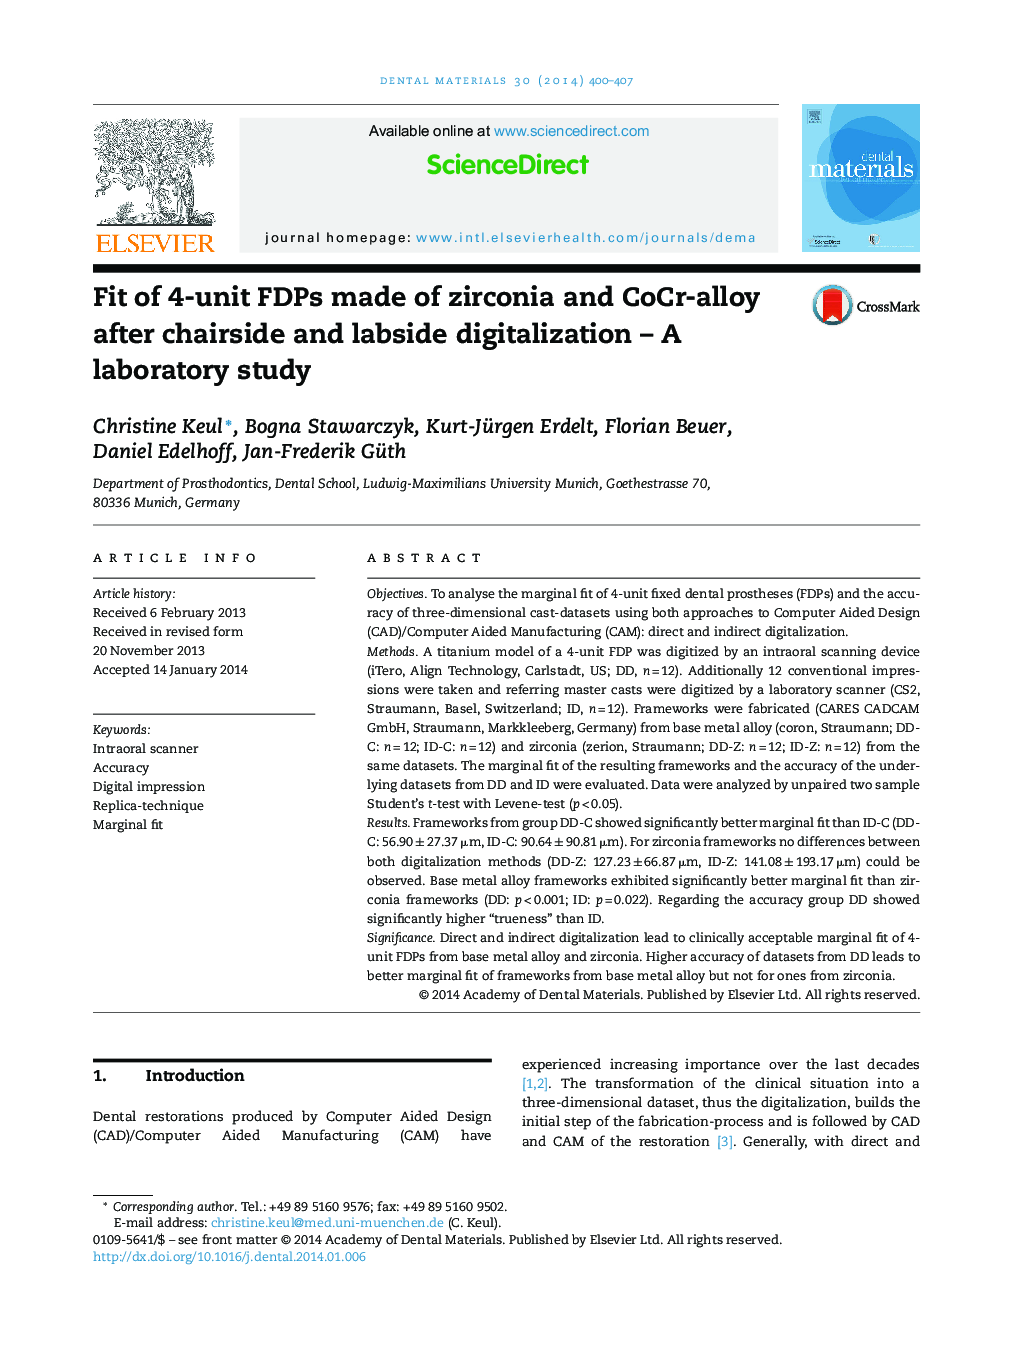 Fit of 4-unit FDPs made of zirconia and CoCr-alloy after chairside and labside digitalization – A laboratory study